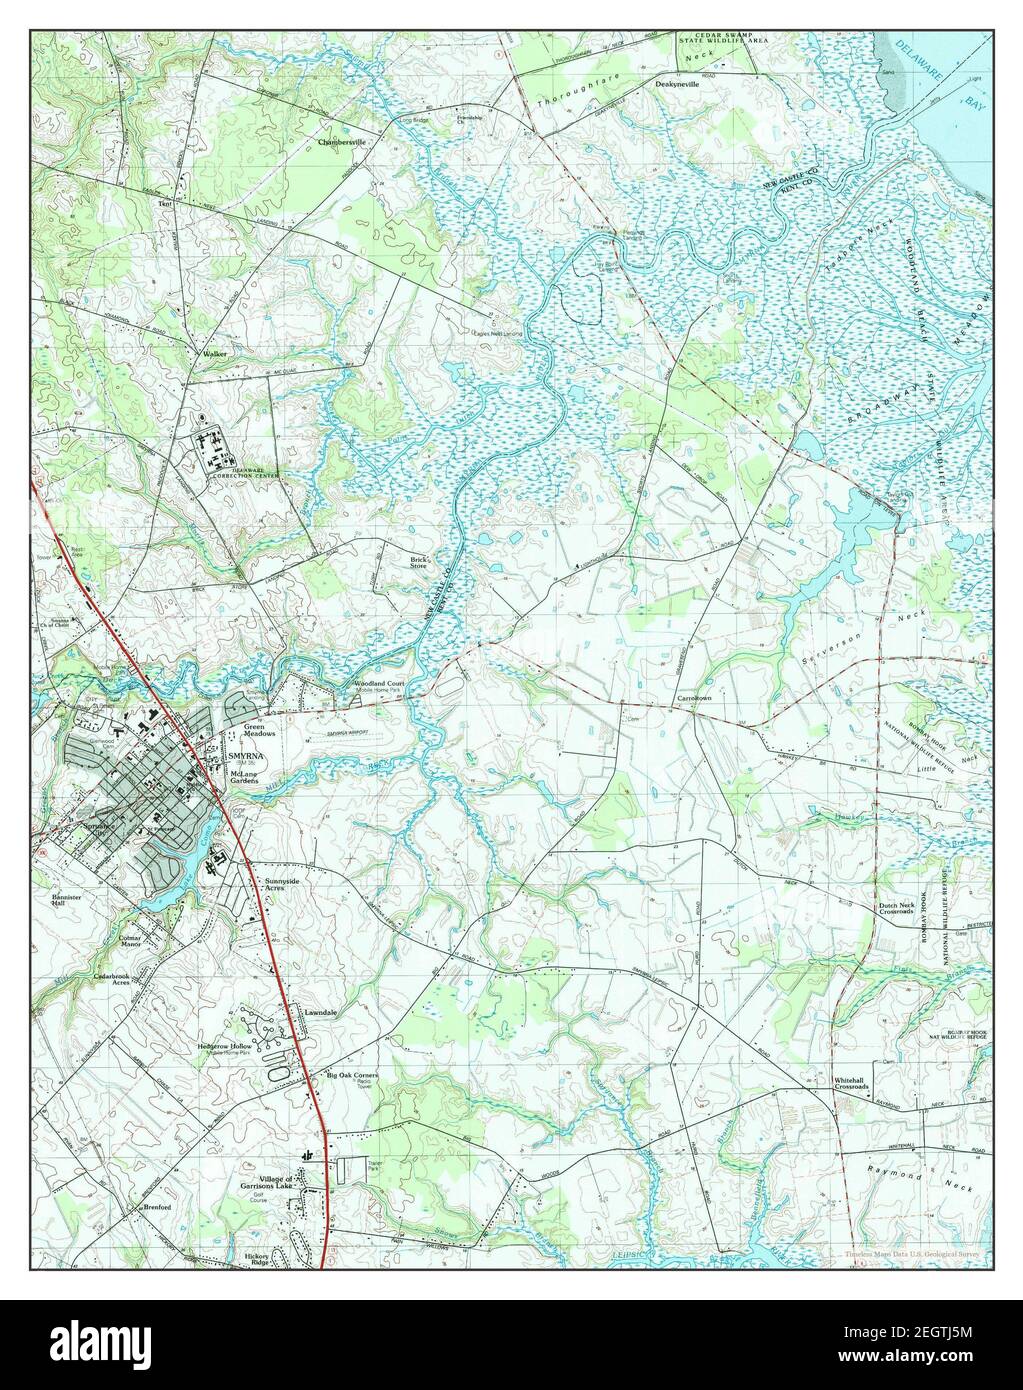 Smyrna, Delaware, map 1993, 1:24000, United States of America by Timeless Maps, data U.S. Geological Survey Foto Stock